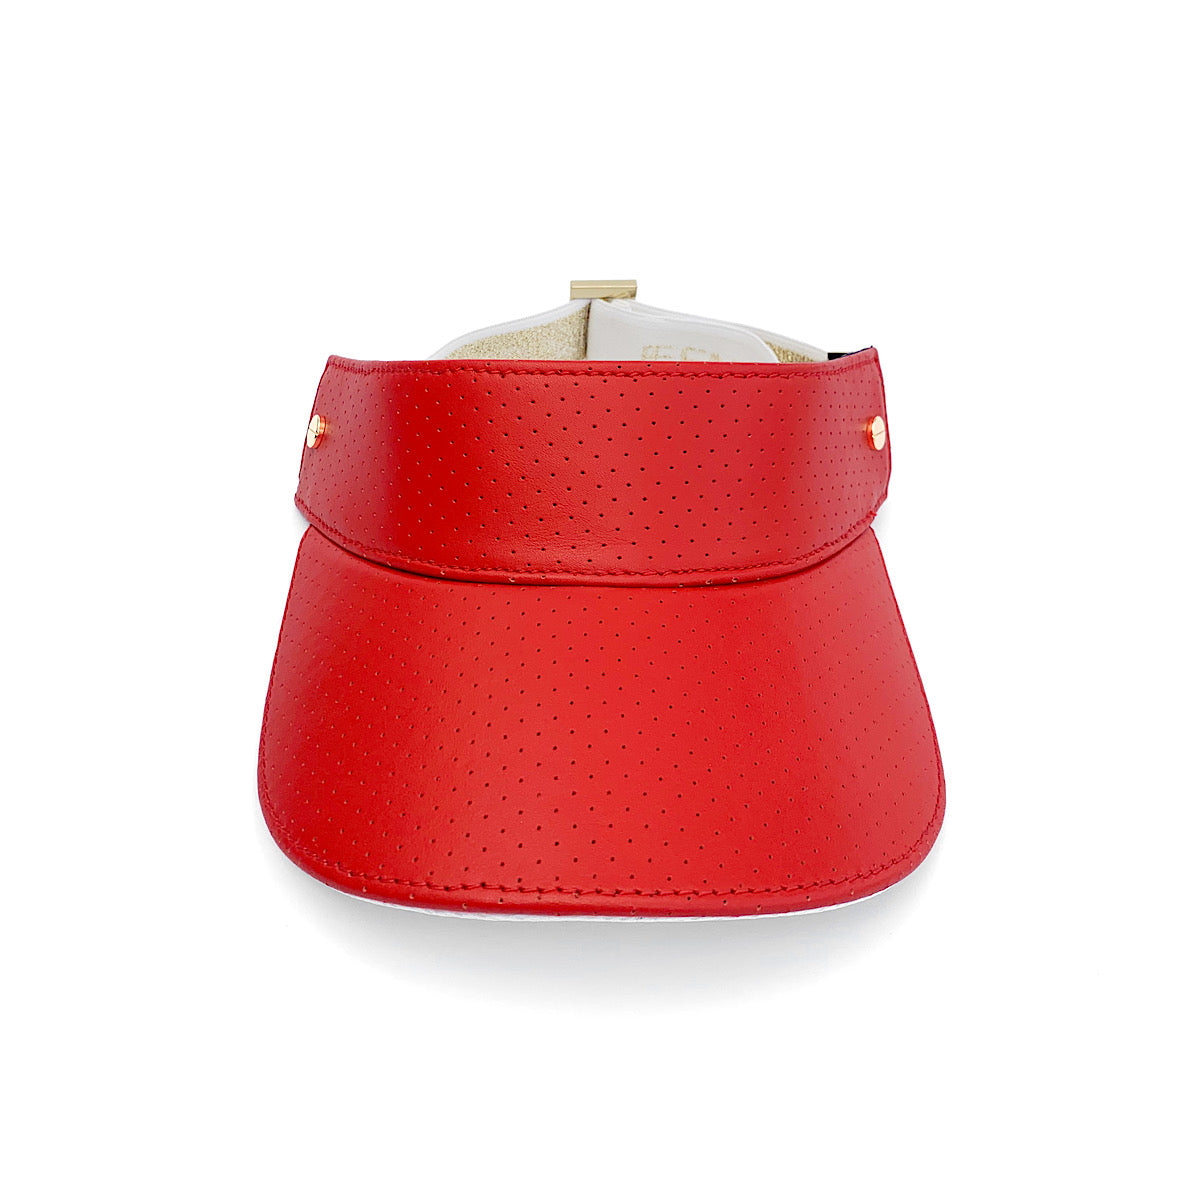 The Visor - Parrot Red Leather / White & Gold